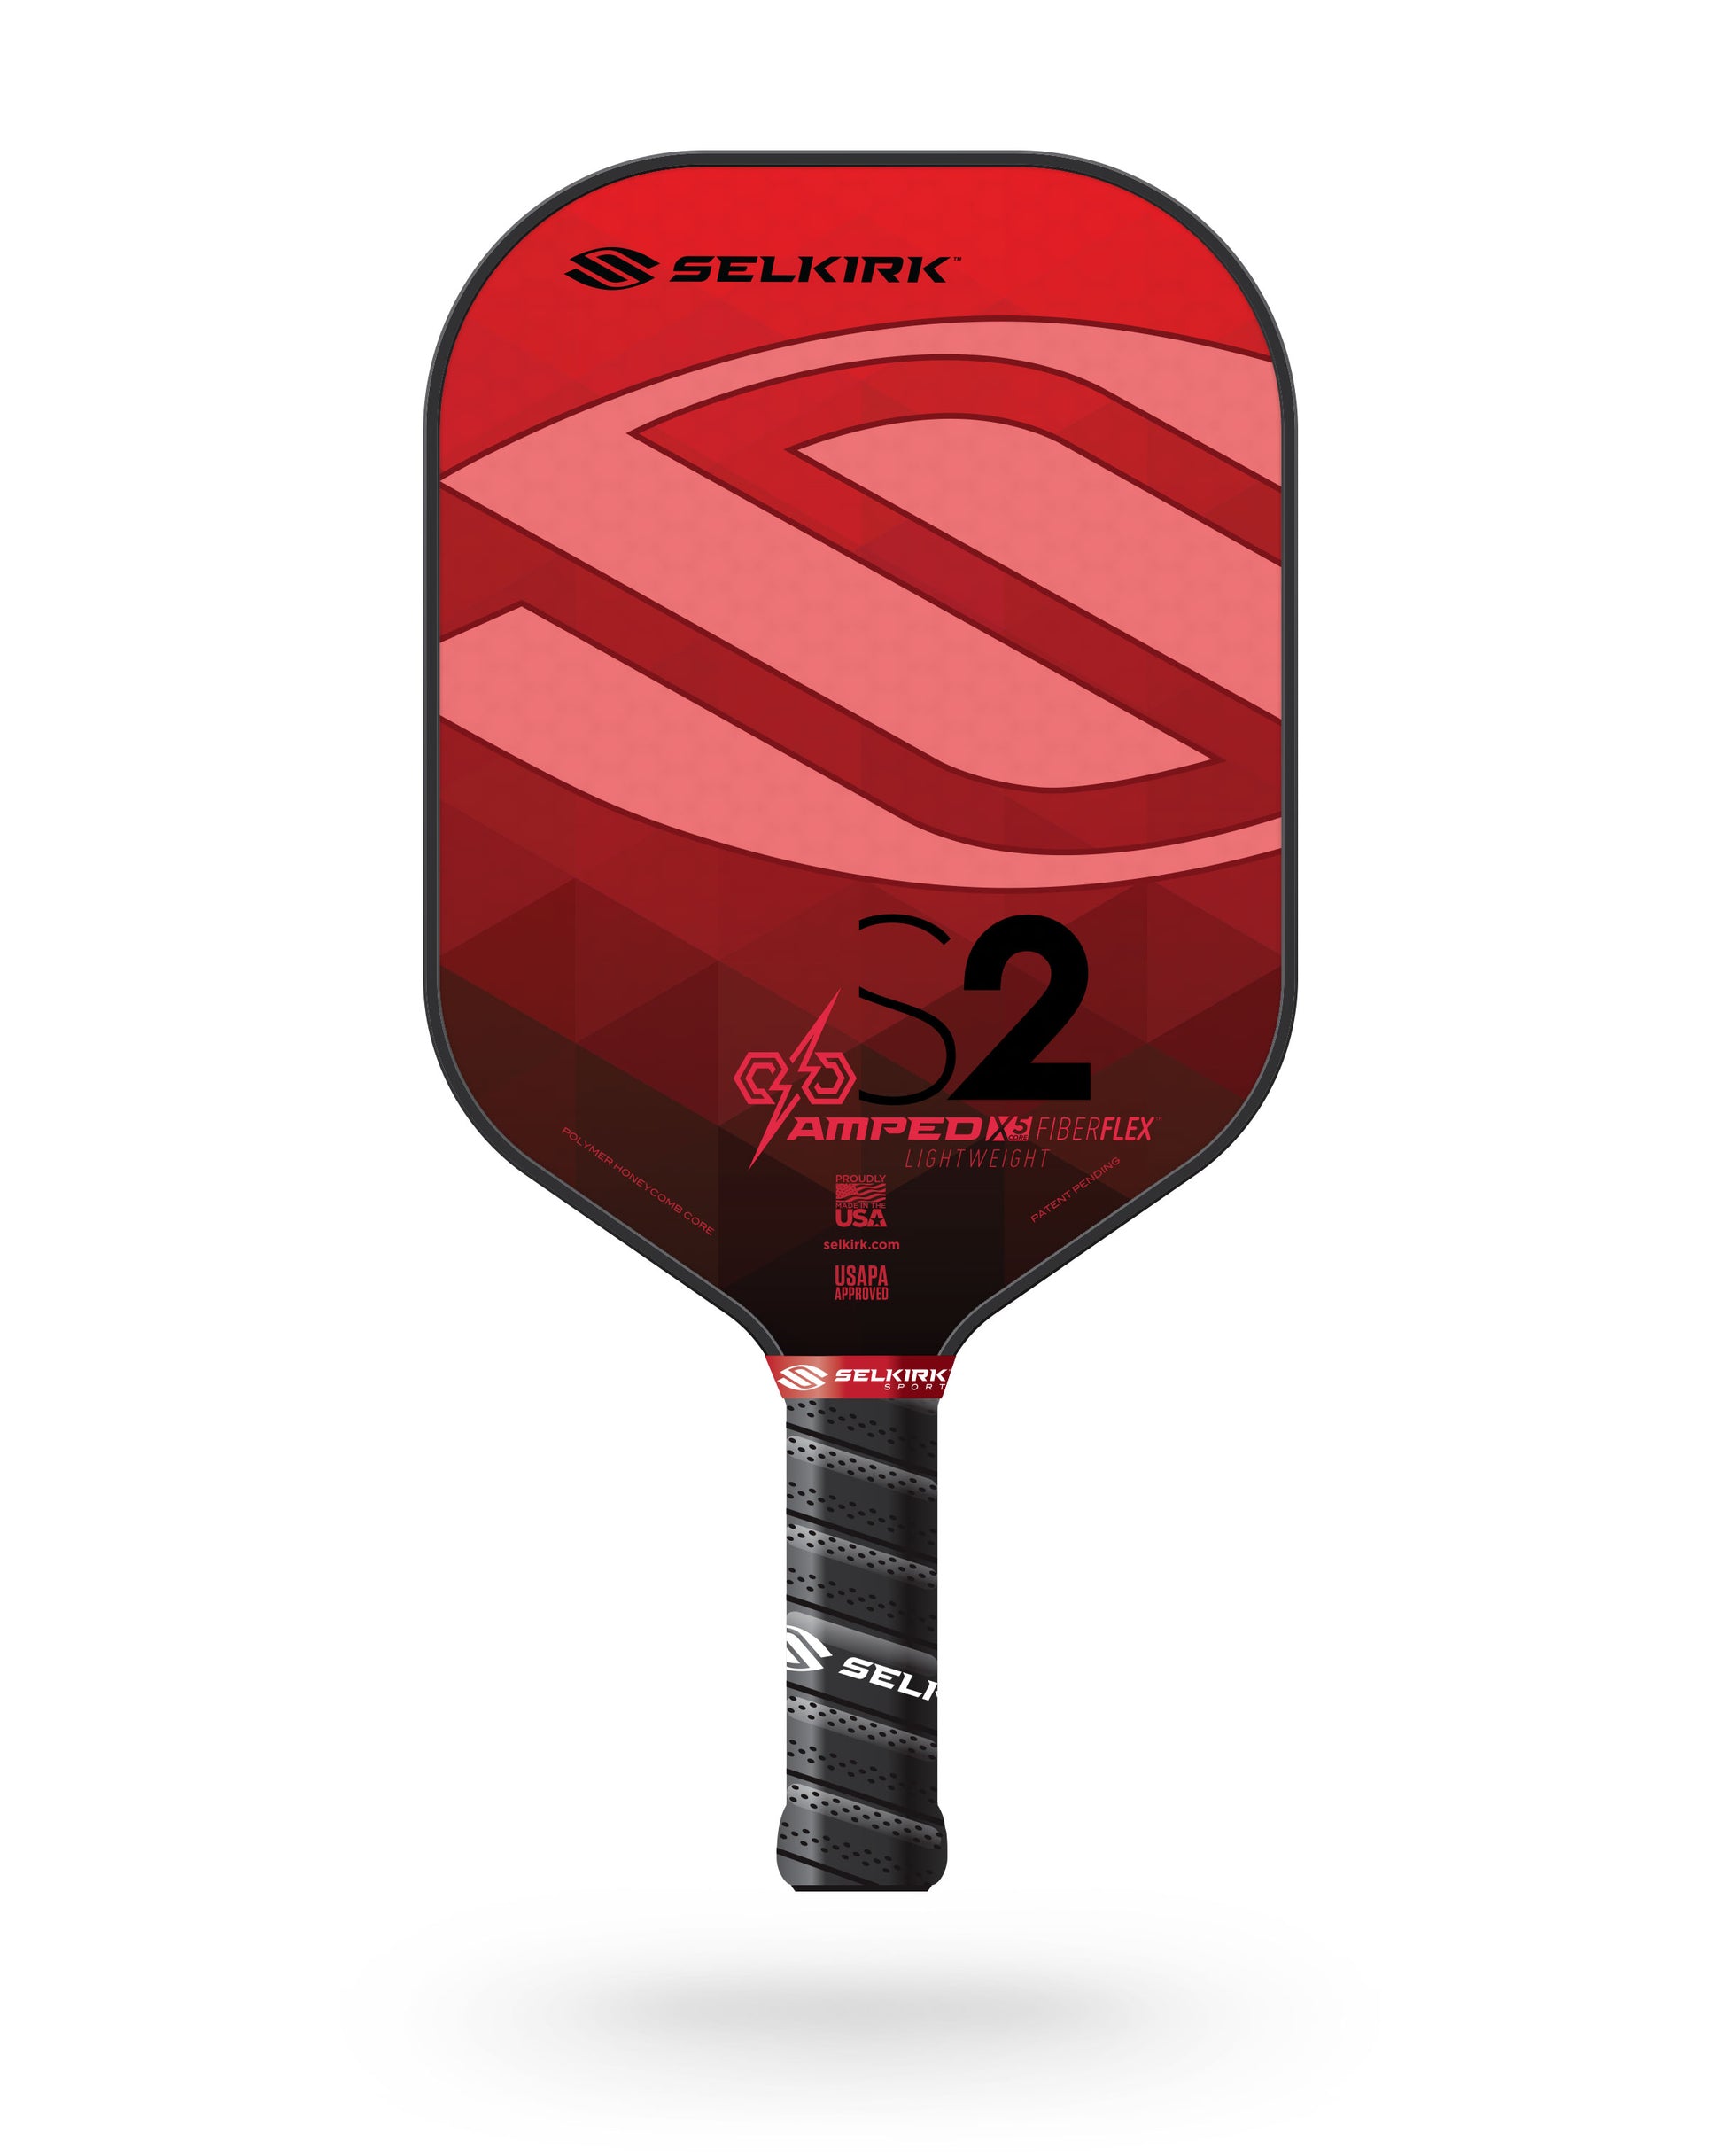 Selkirk AMPED S2 Pickleball Paddle in red and pink